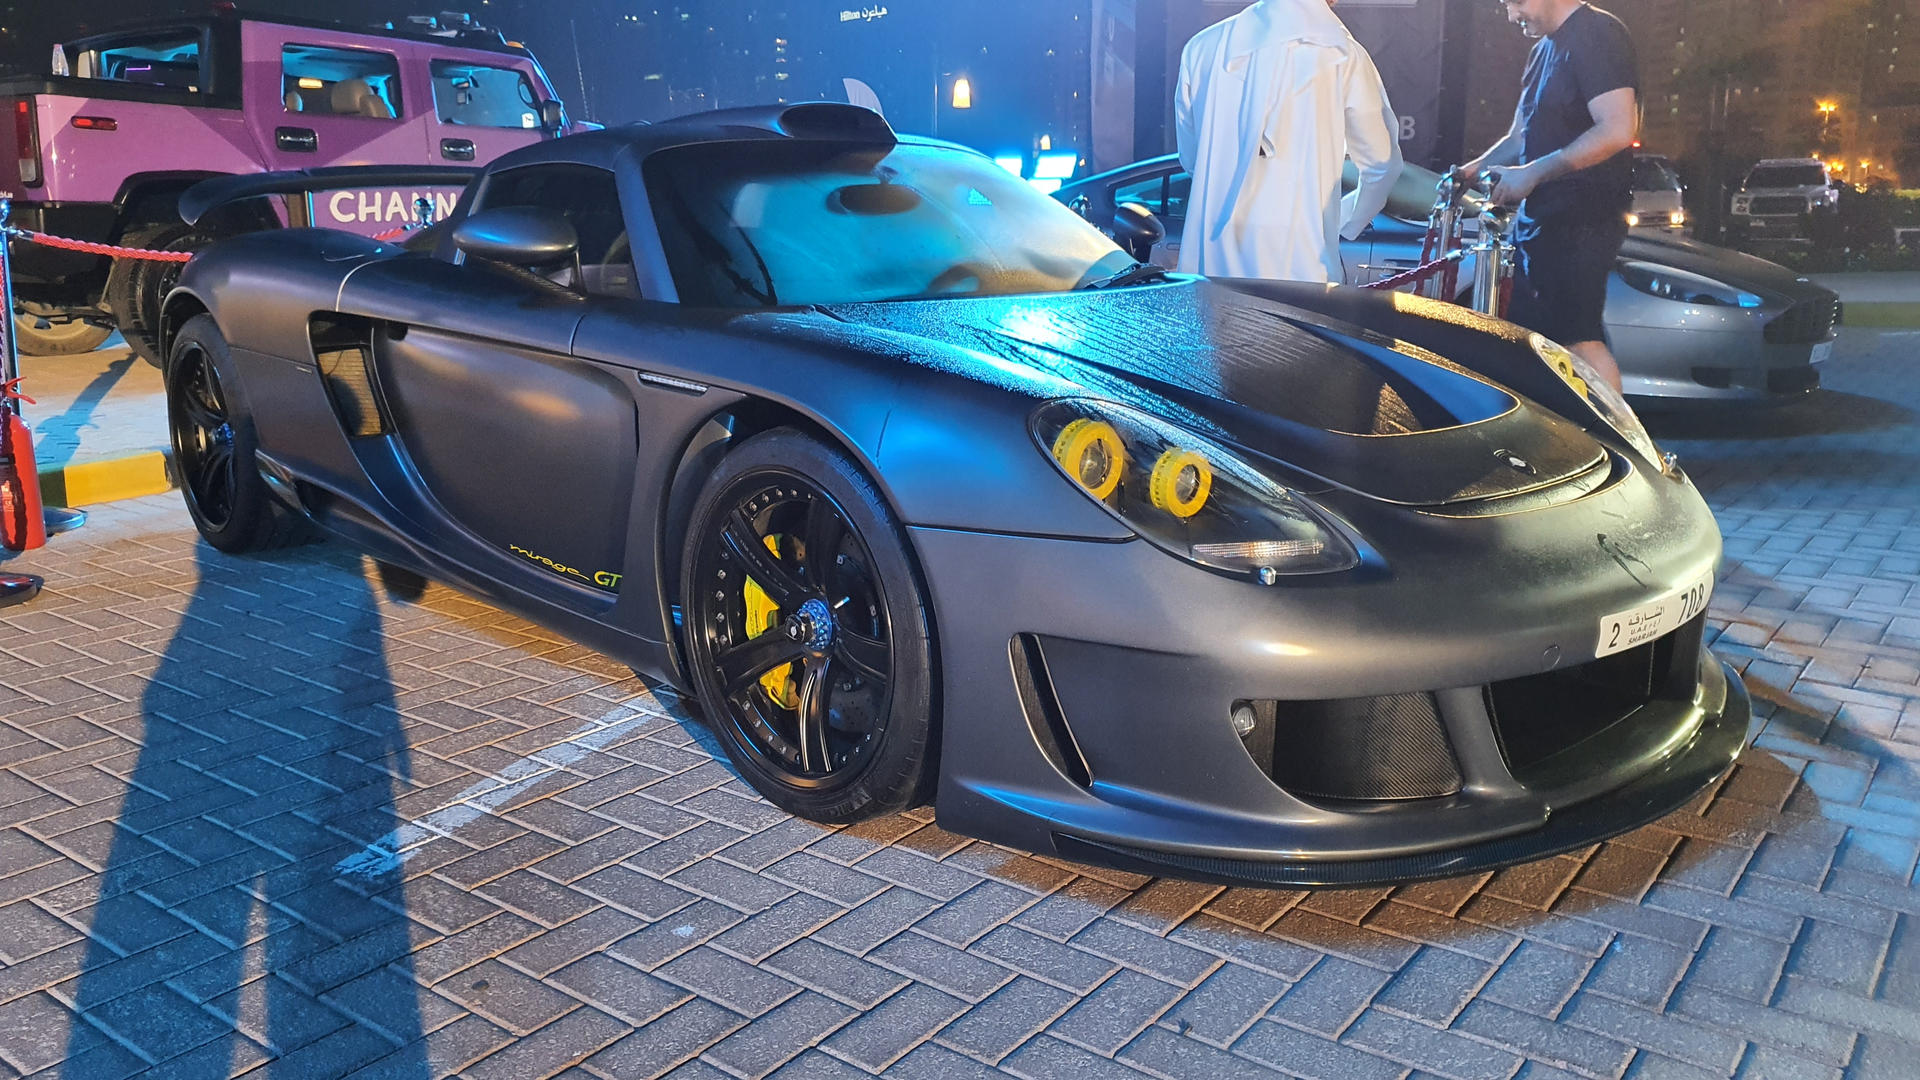 Carrera GT Gemballa Mirage GT. Only 25 made by haseeb312 on DeviantArt